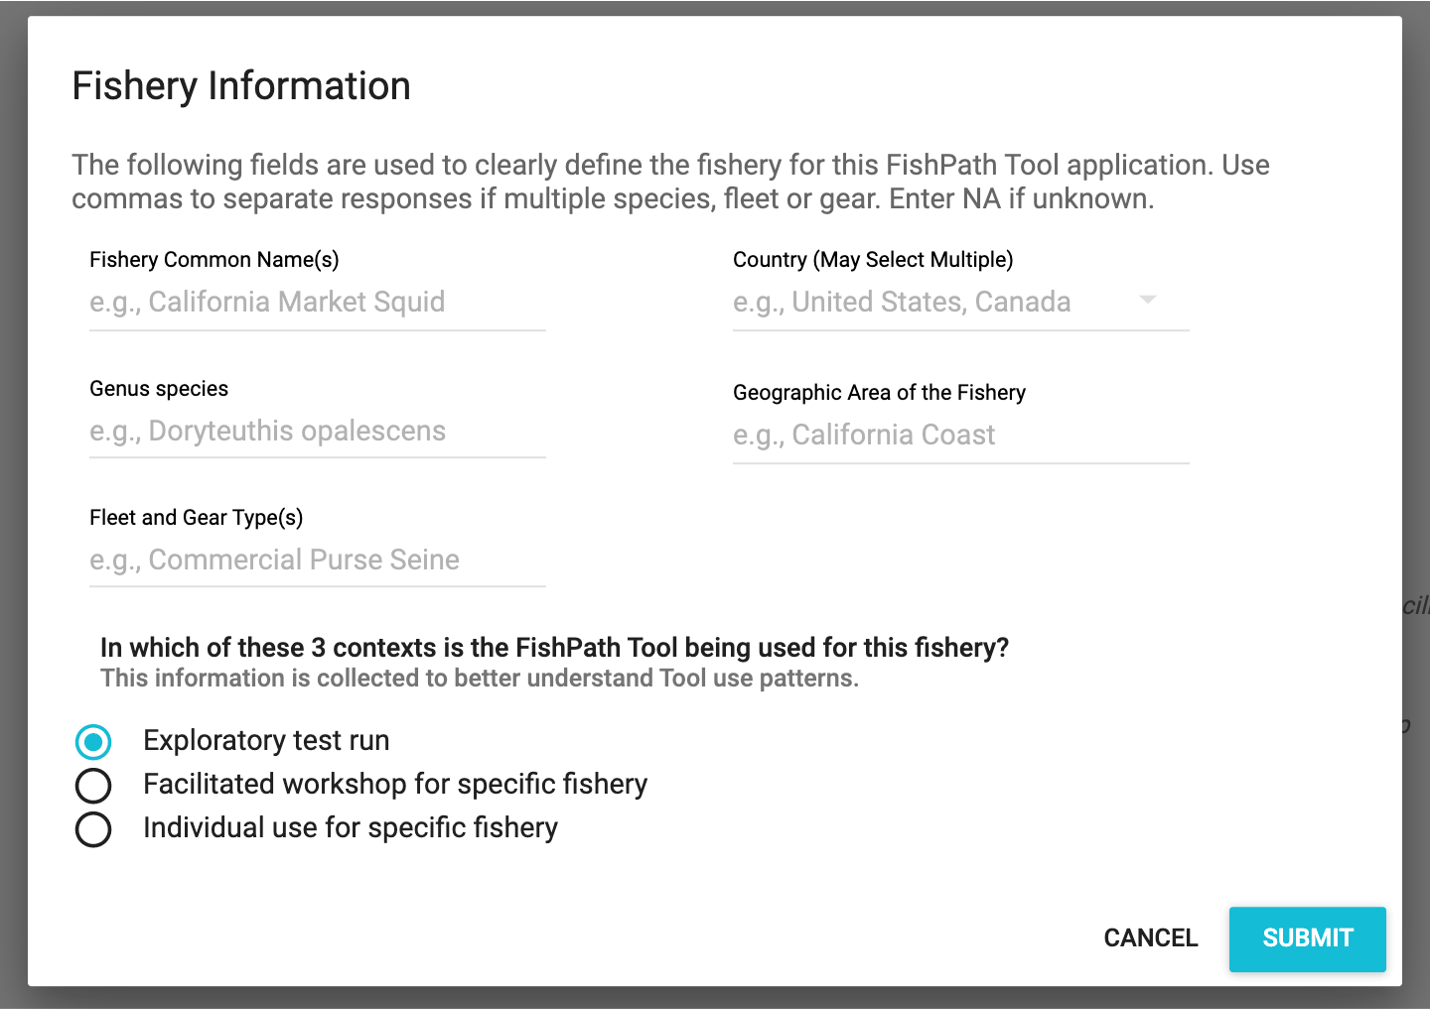 Fishery Information pop-up screen of the FishPath Tool.